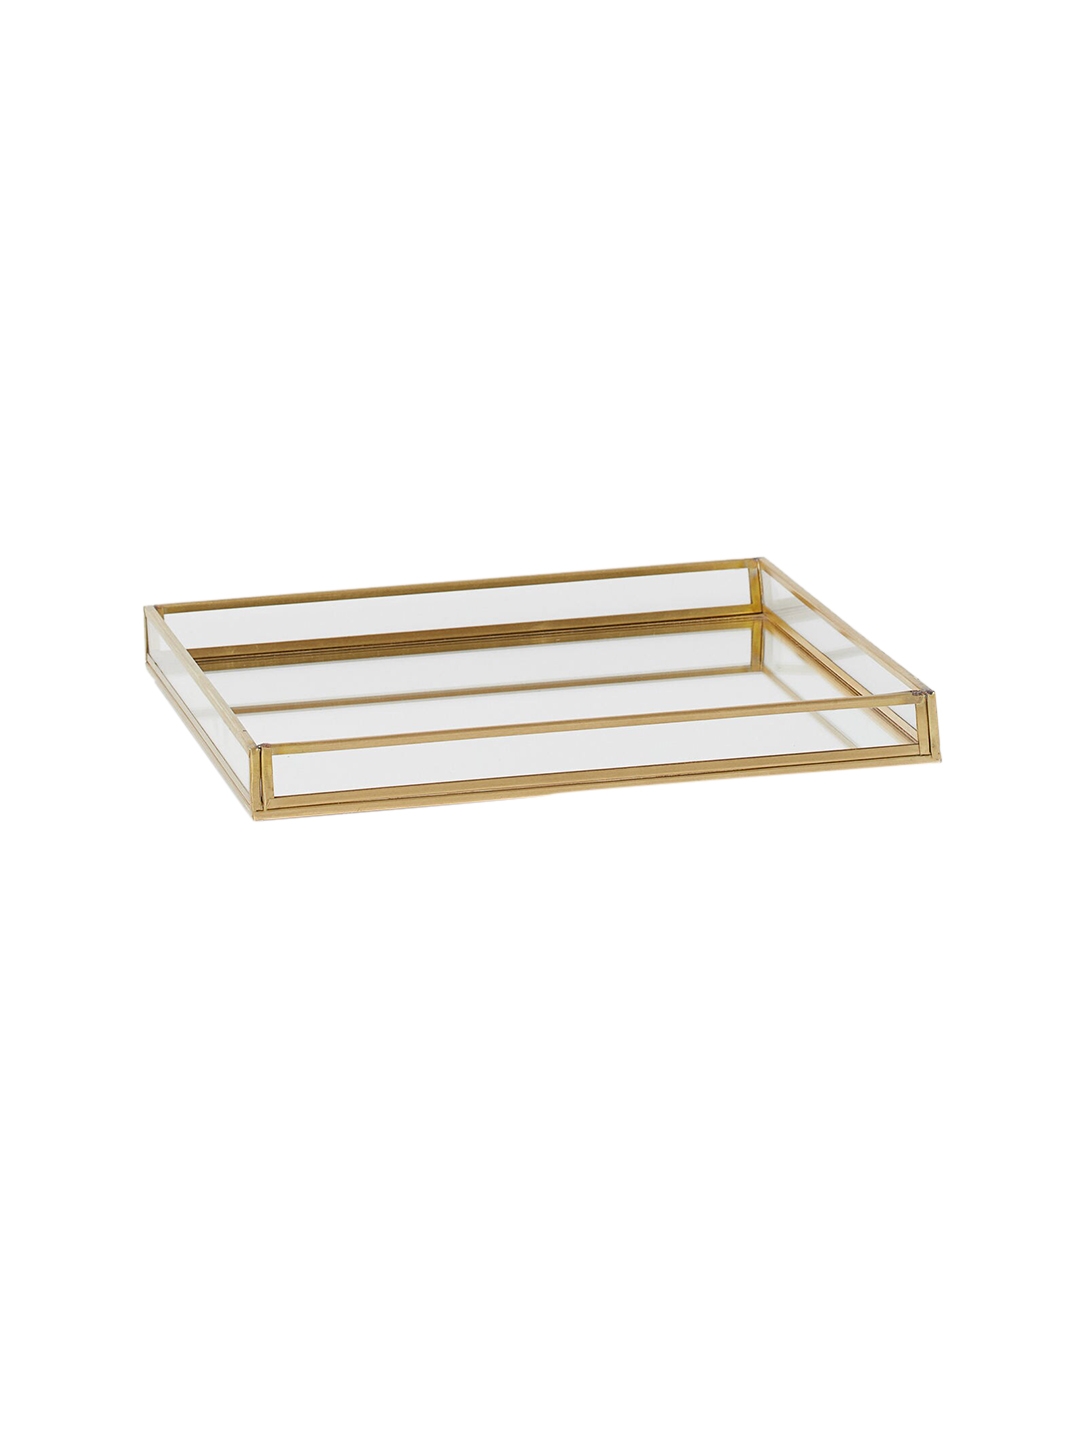 H&M Gold-Toned & Transparent Square Clear Glass Tray